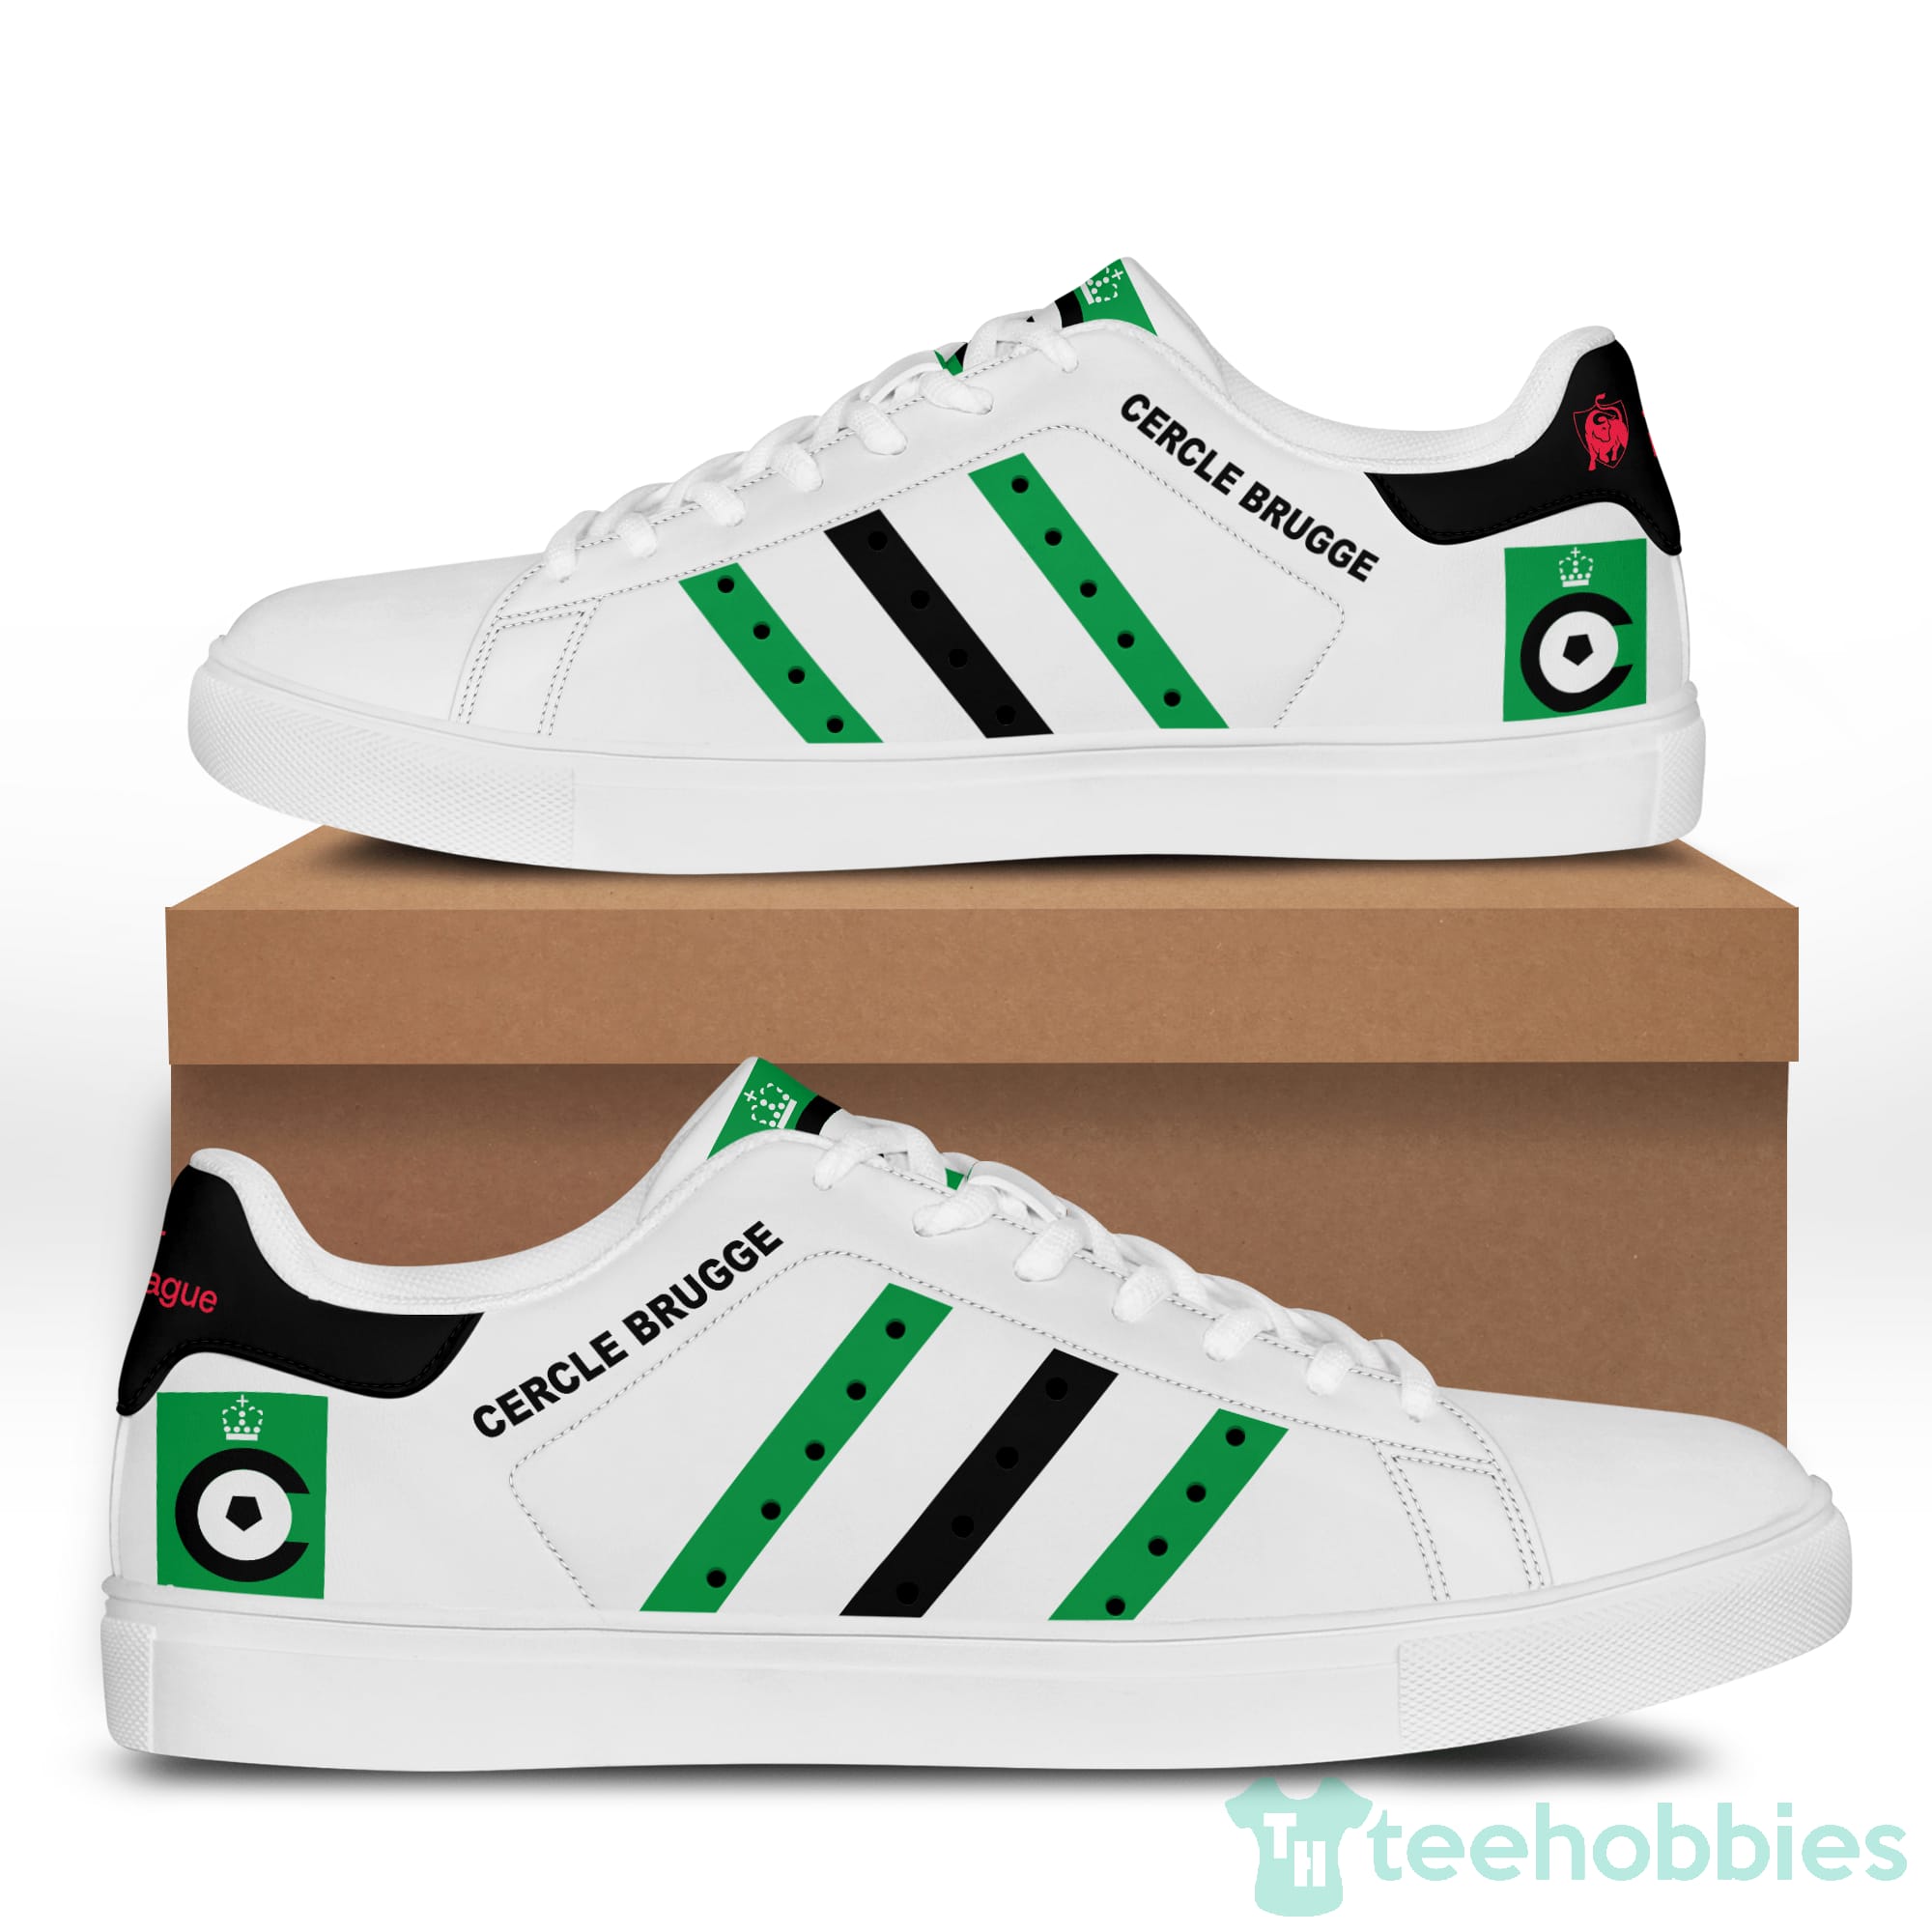 Cercle Brugge K.S White Low Top Skate Shoes